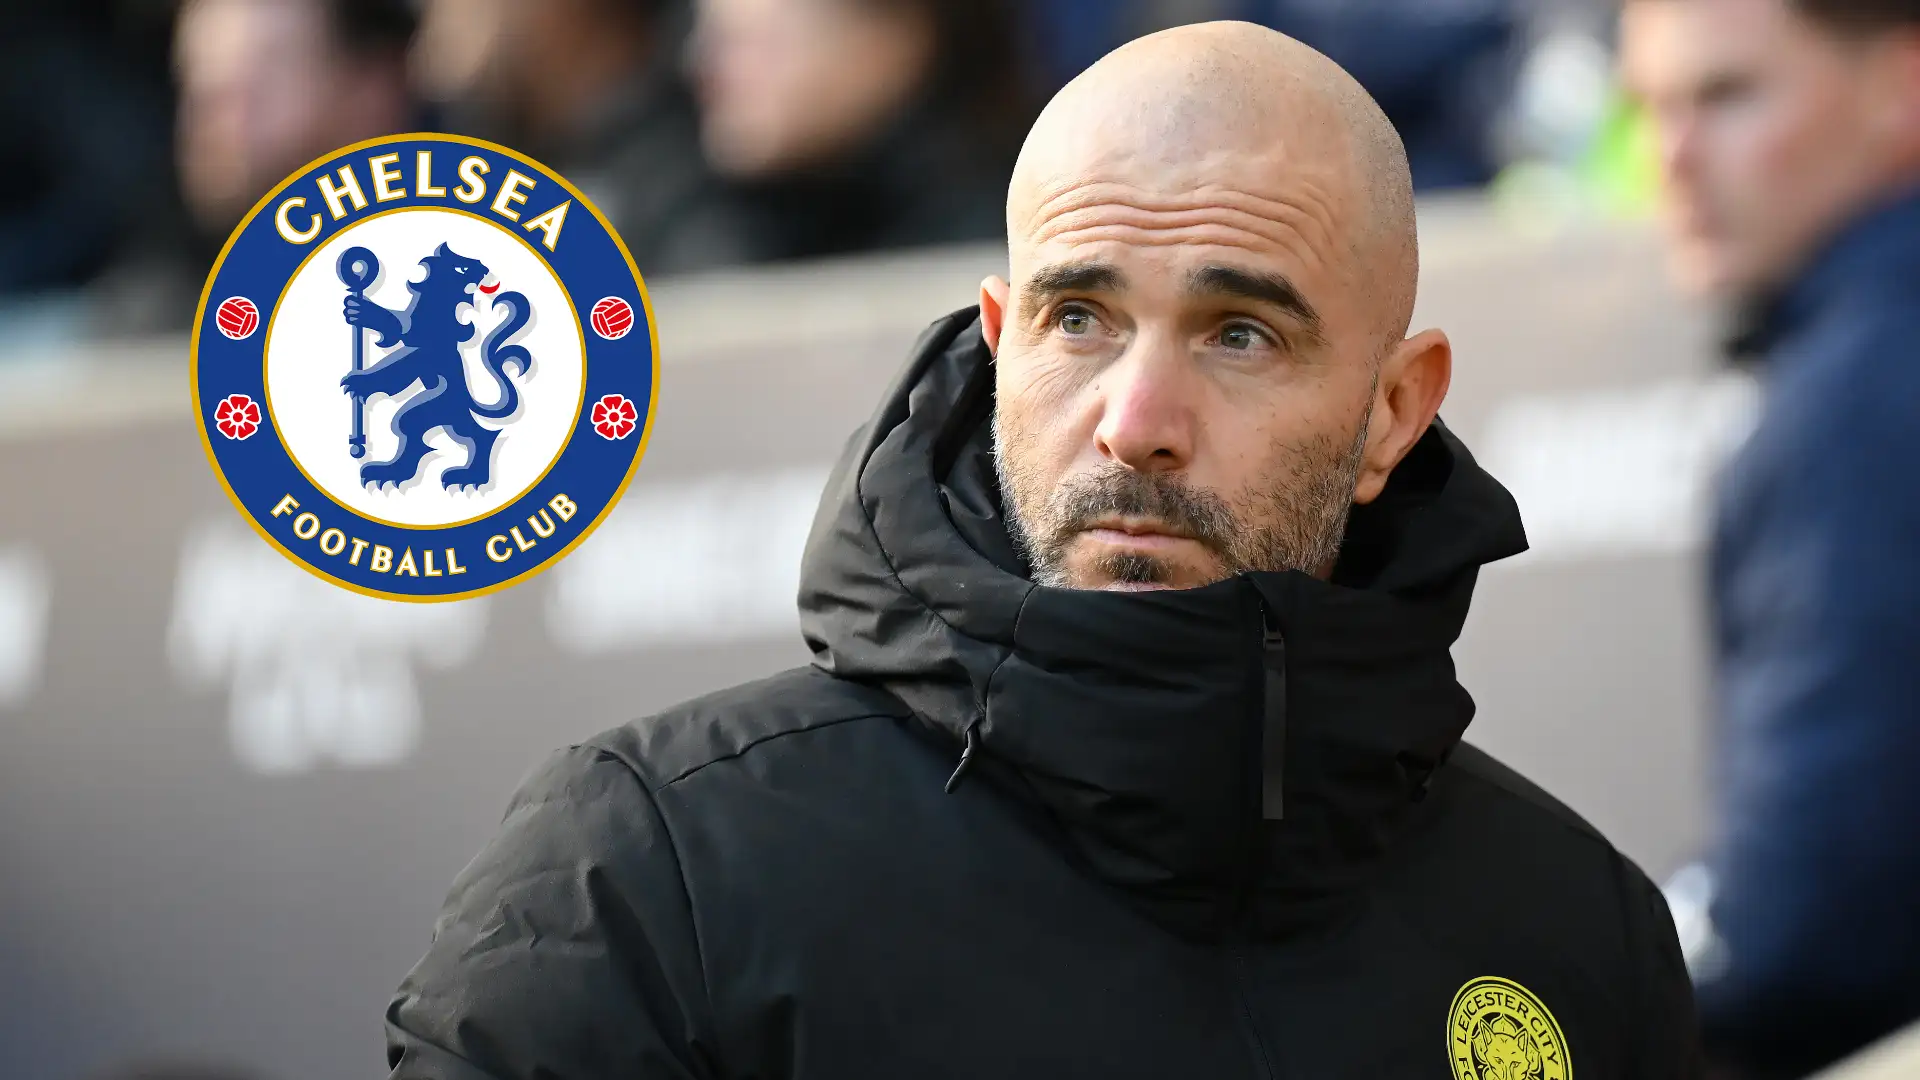 Enzo Maresca is Chelsea's new manager! Pep Guardiola's former assistant agrees shock five-year contract at Stamford Bridge after guiding Leicester back to Premier League